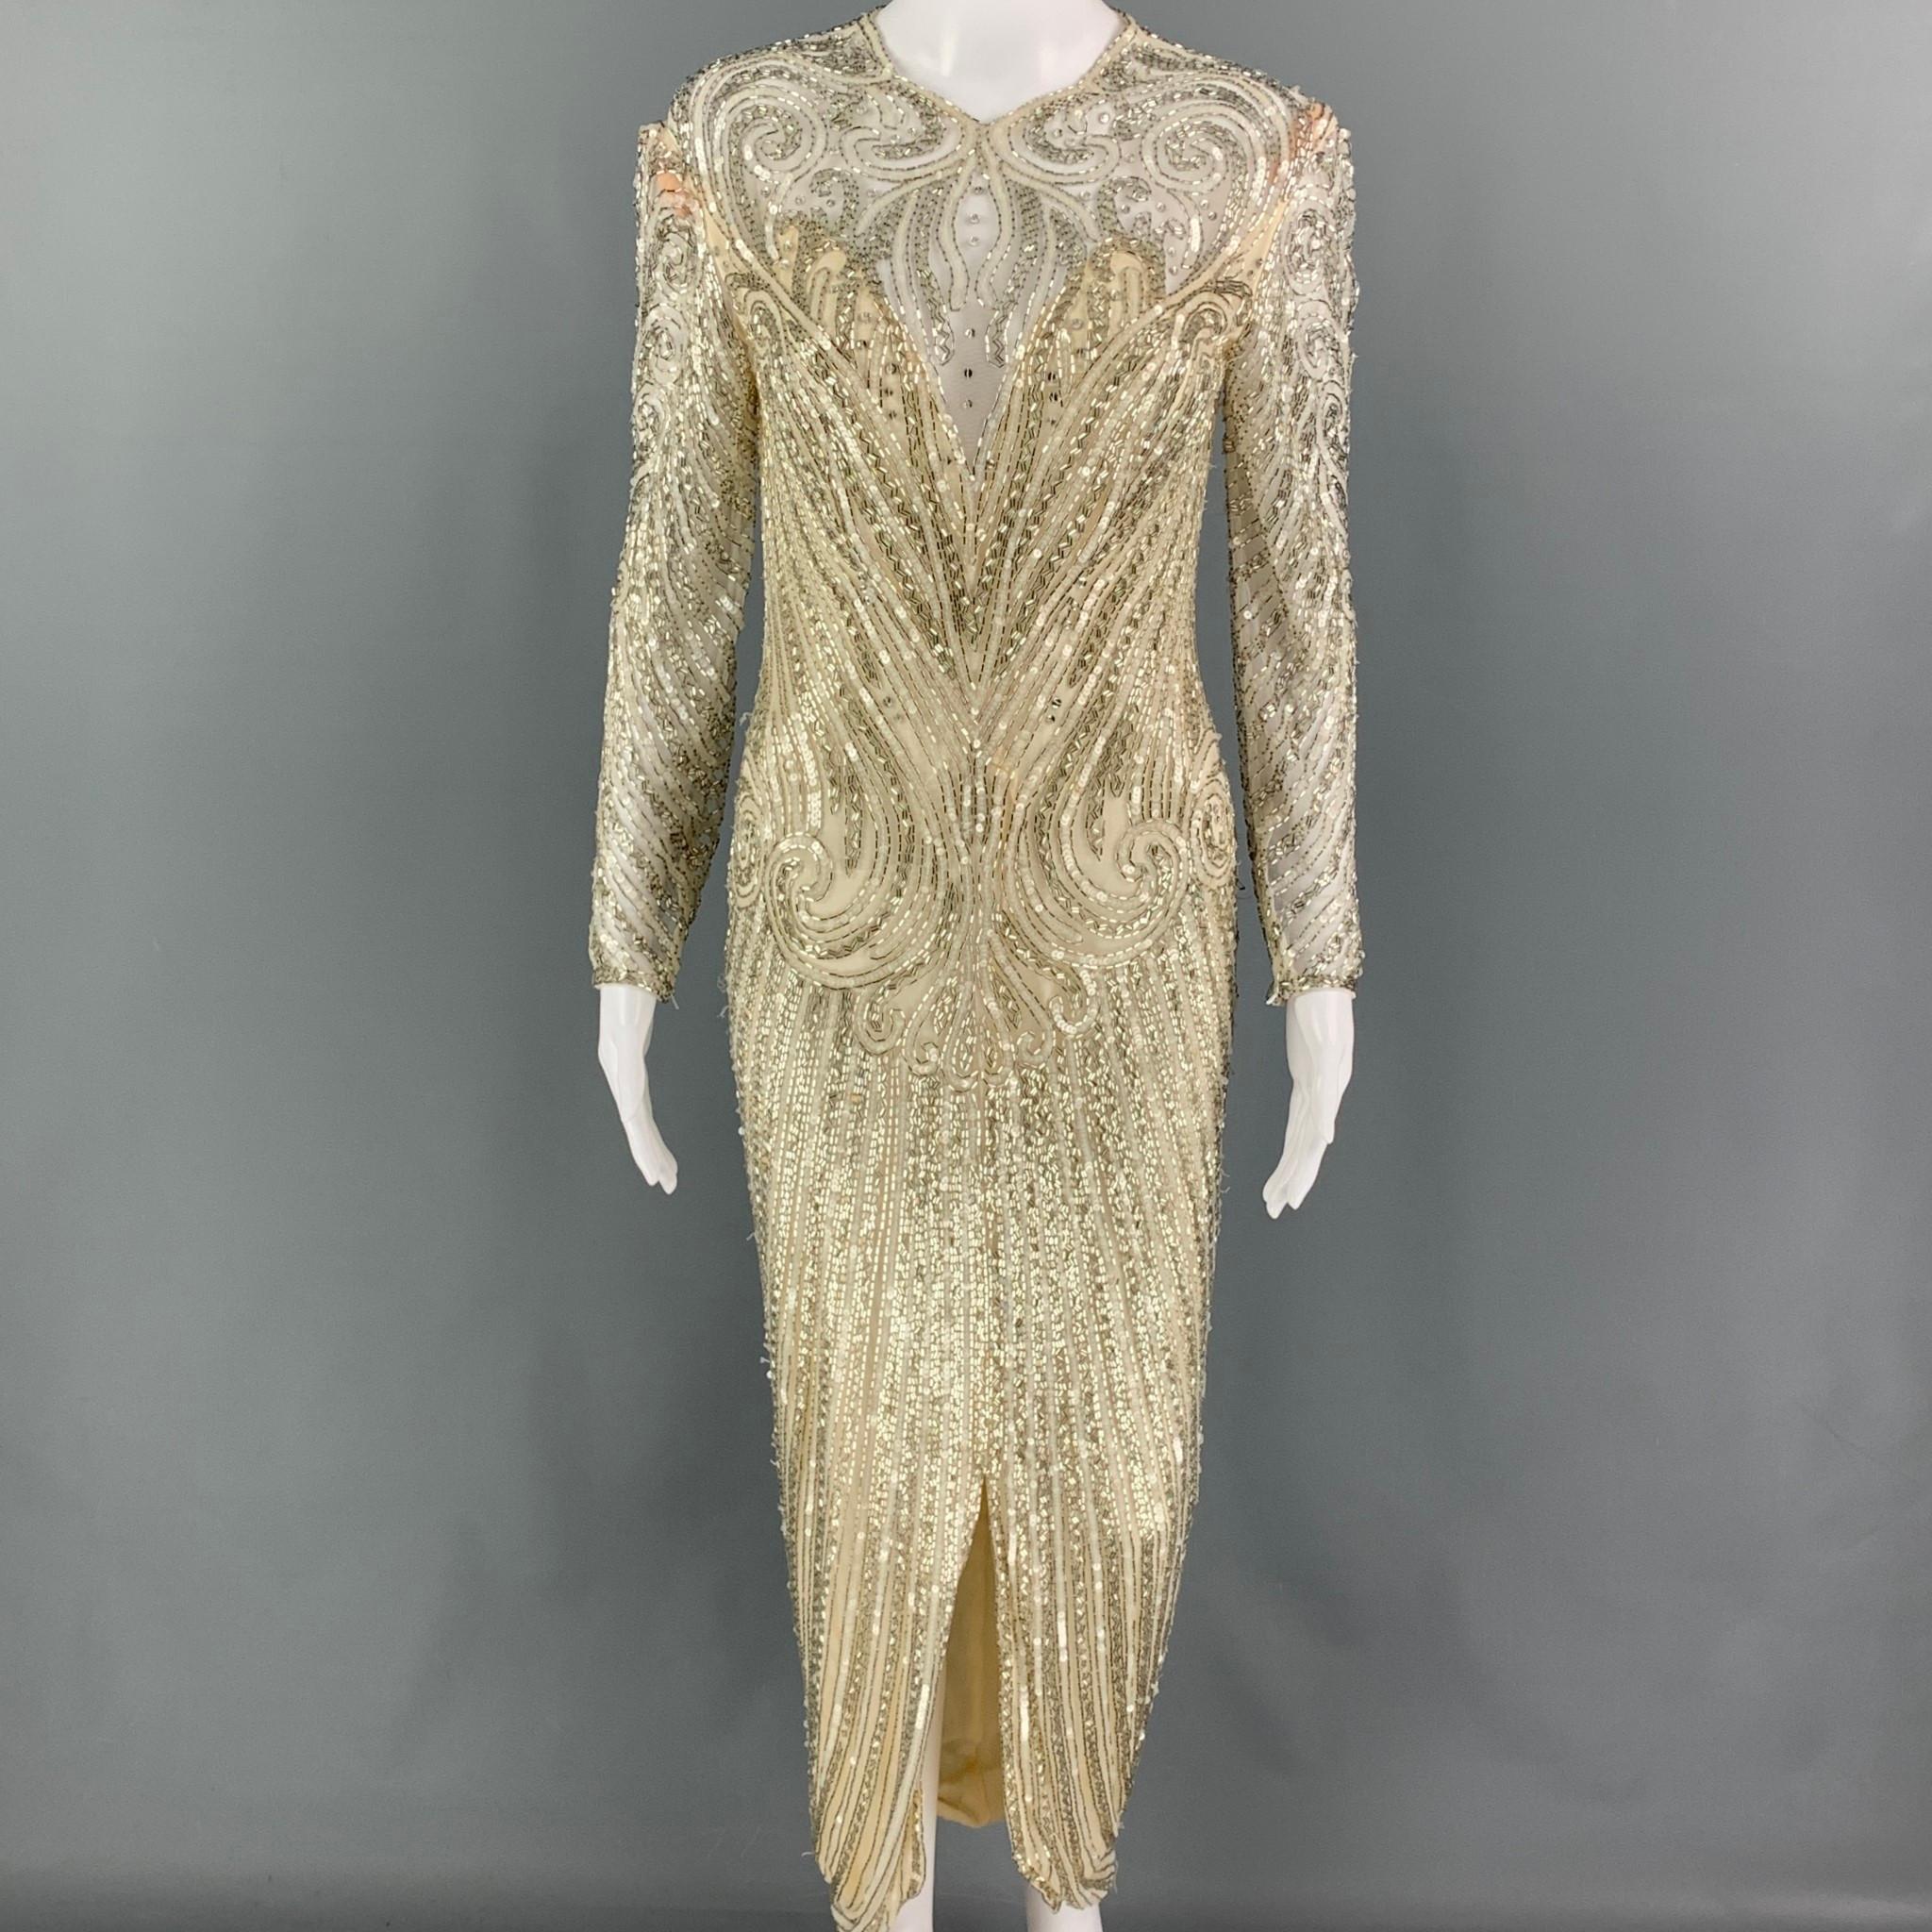 Vintage BOB MACKIE dress comes in a cream & silver silk featuring a beaded design throughout, open back, fitted, hook & loop detail, and back zipper closure. 

Very Good Pre-Owned Condition. Light wear at closure. As-is.
Marked: